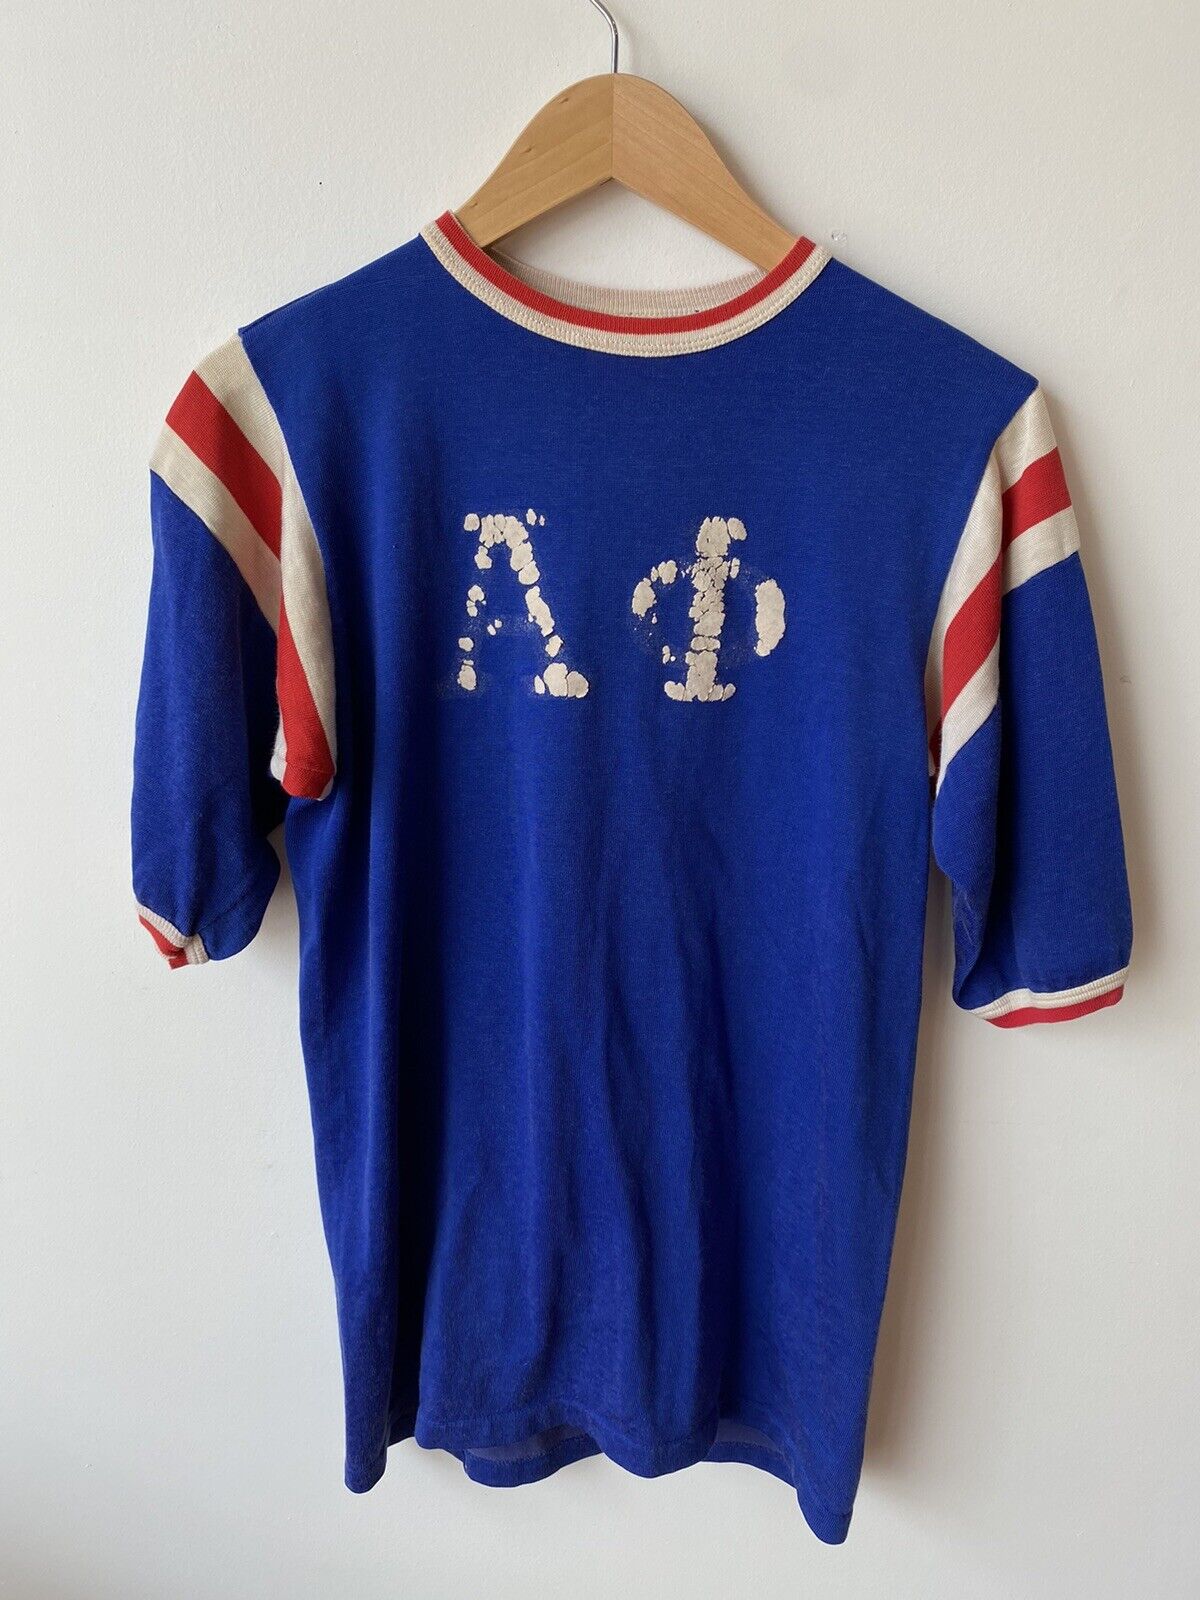 Vintage 70s 80s Sorority Fraternity Rawlings Blue Football Jersey Small S